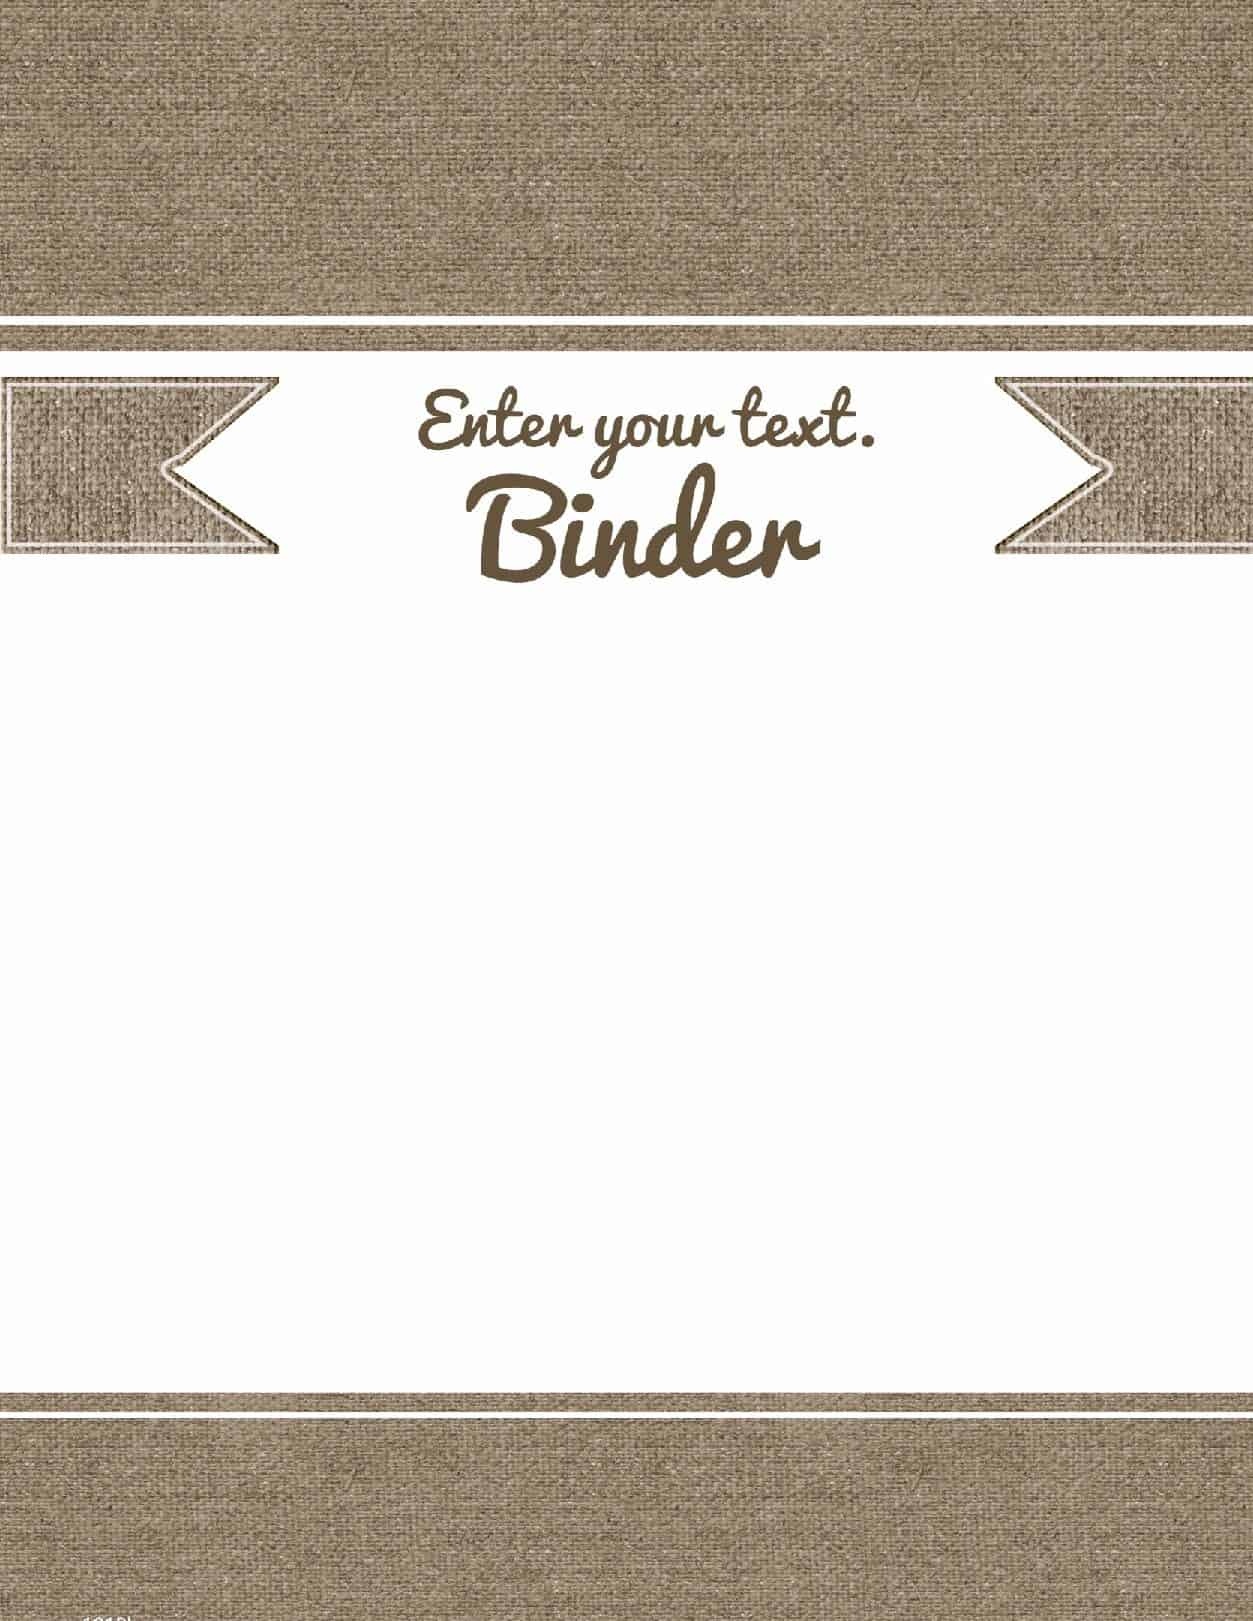 Free Binder Cover Templates | Customize Online &amp;amp; Print At Home | Free! - Free Editable Printable Binder Covers